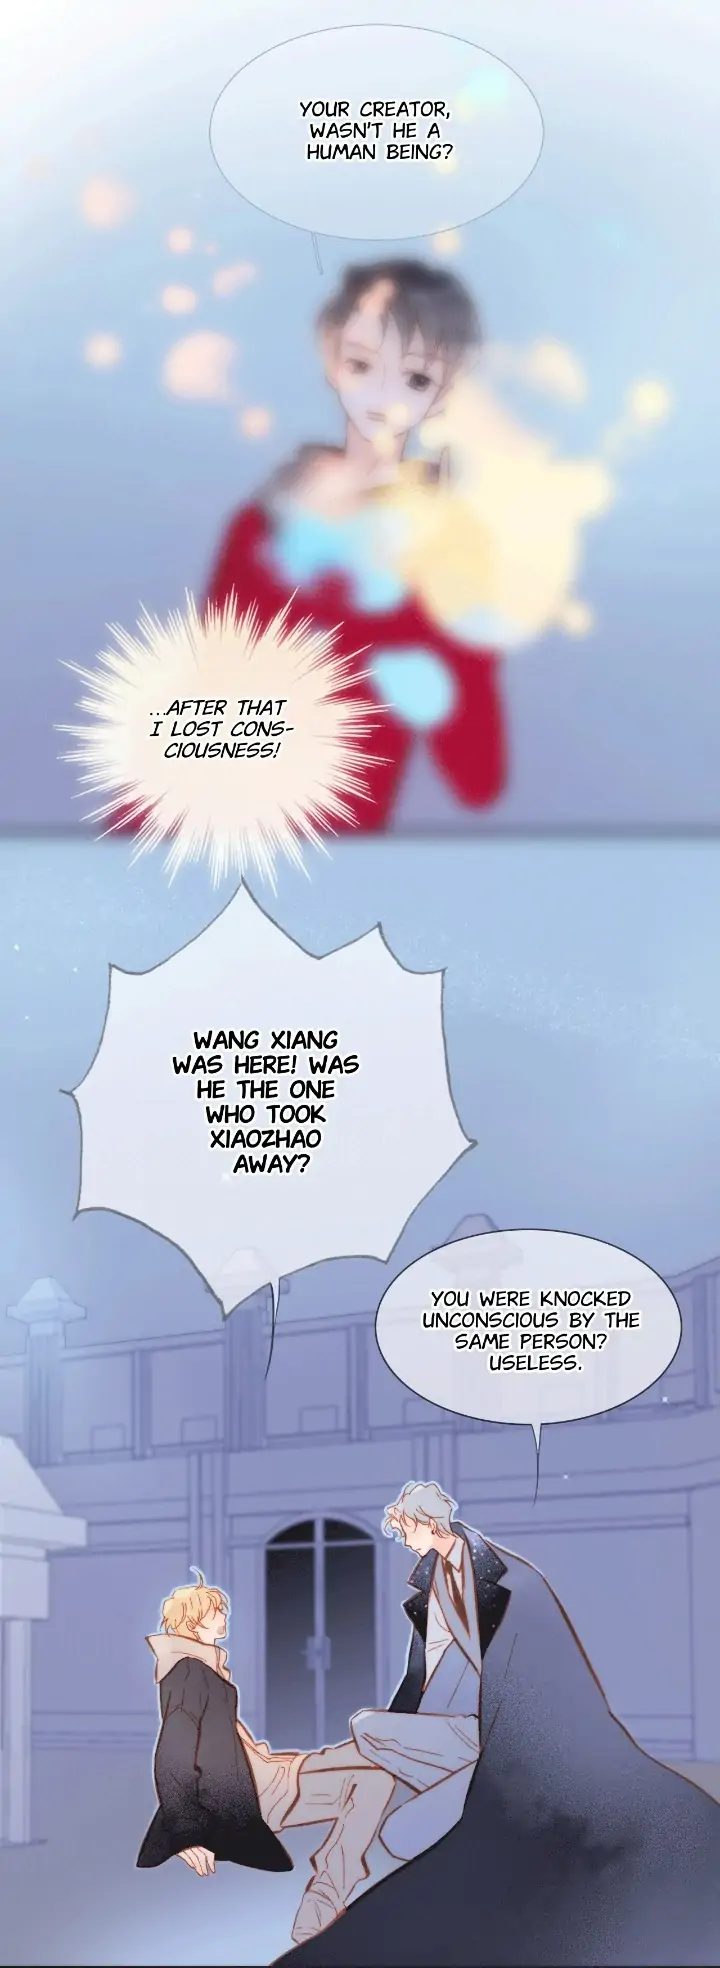 Soundless Cosmos - Page 2